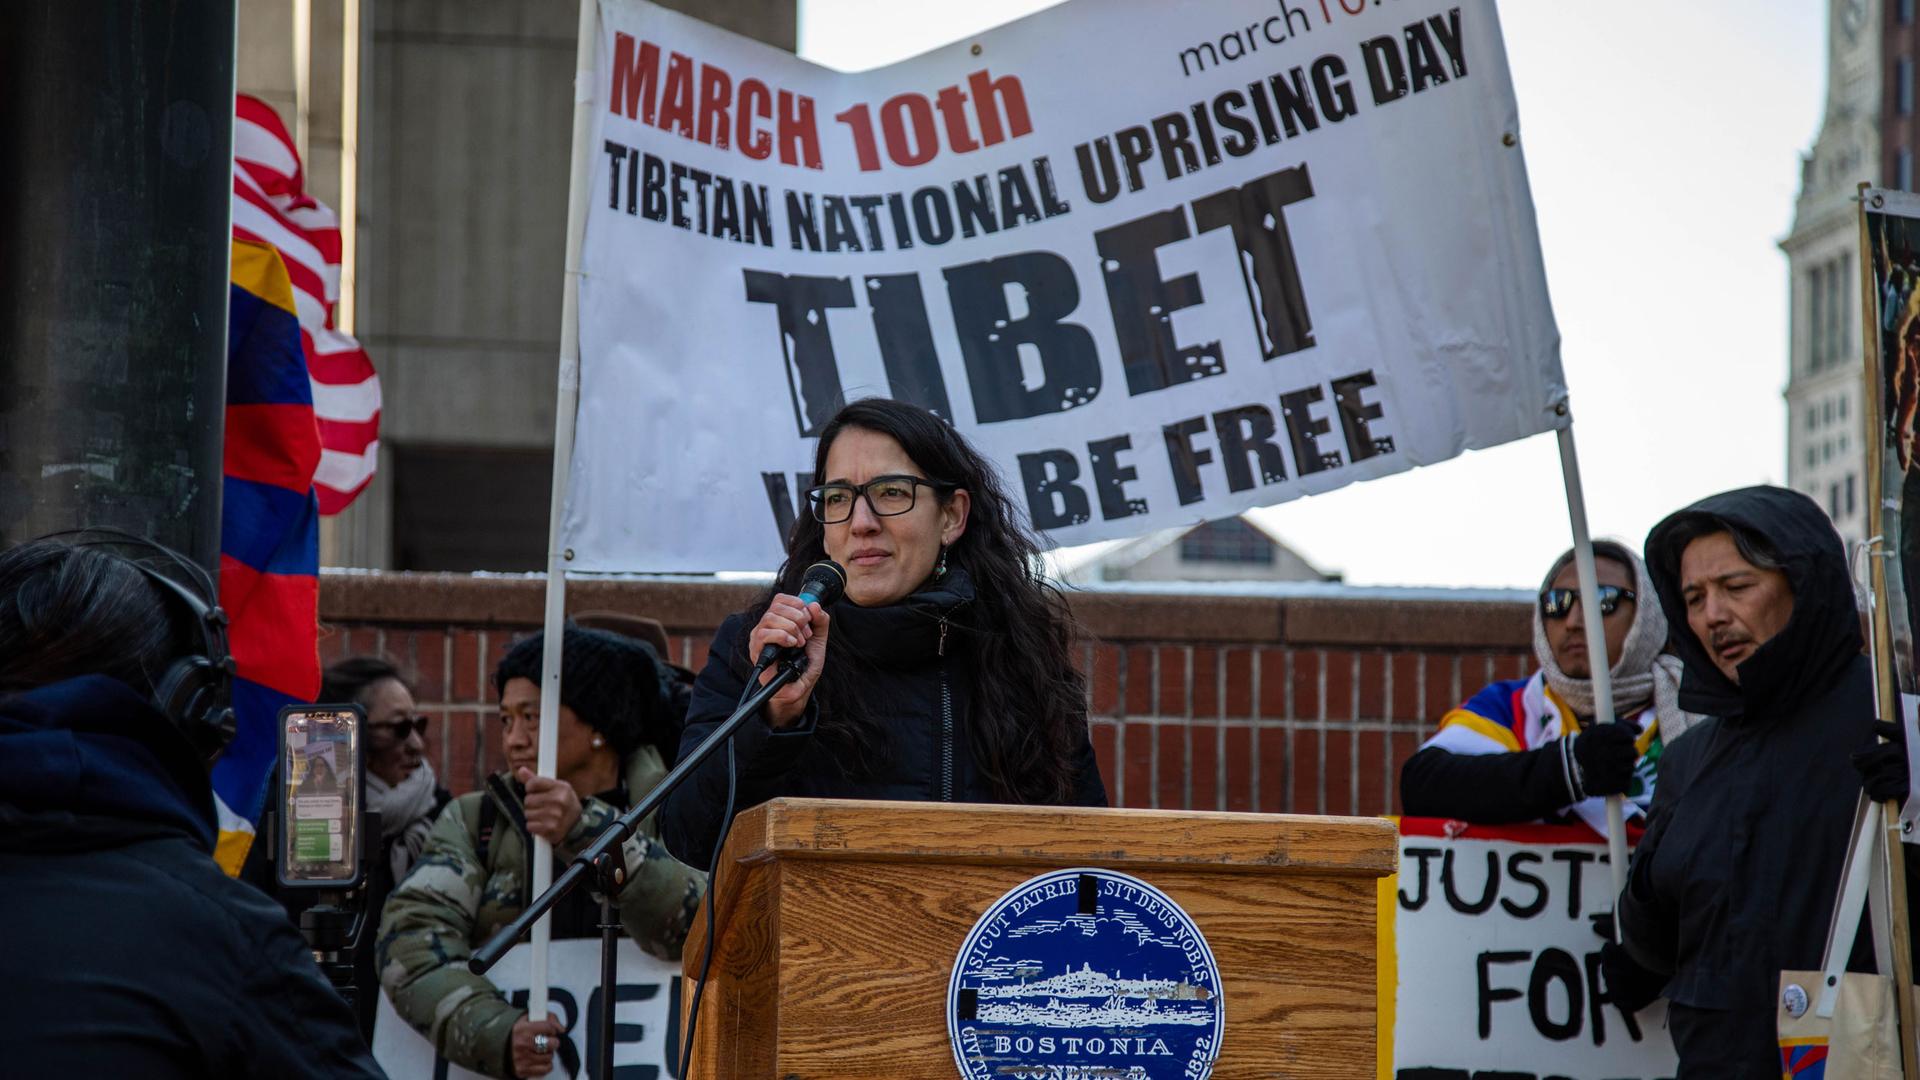 A woman stands at a podium. Behind her is a sign that says "Tibet will be free."